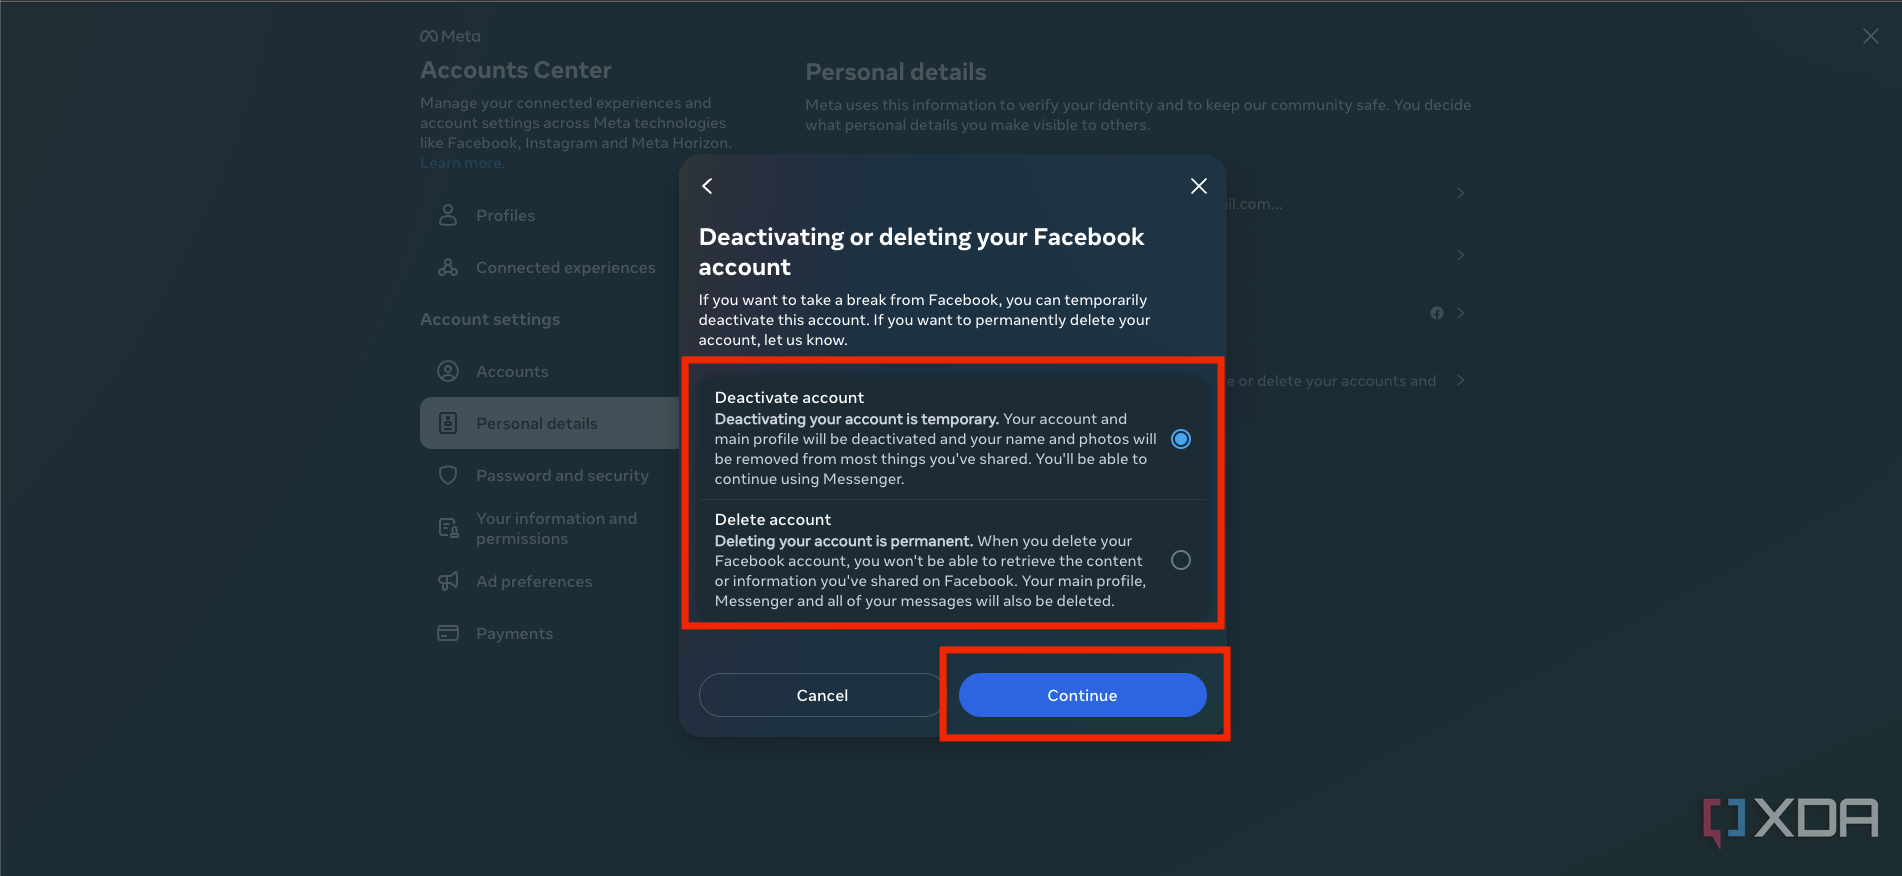 A screenshot showing the final confirmation to delete or deactivate account in facebook.